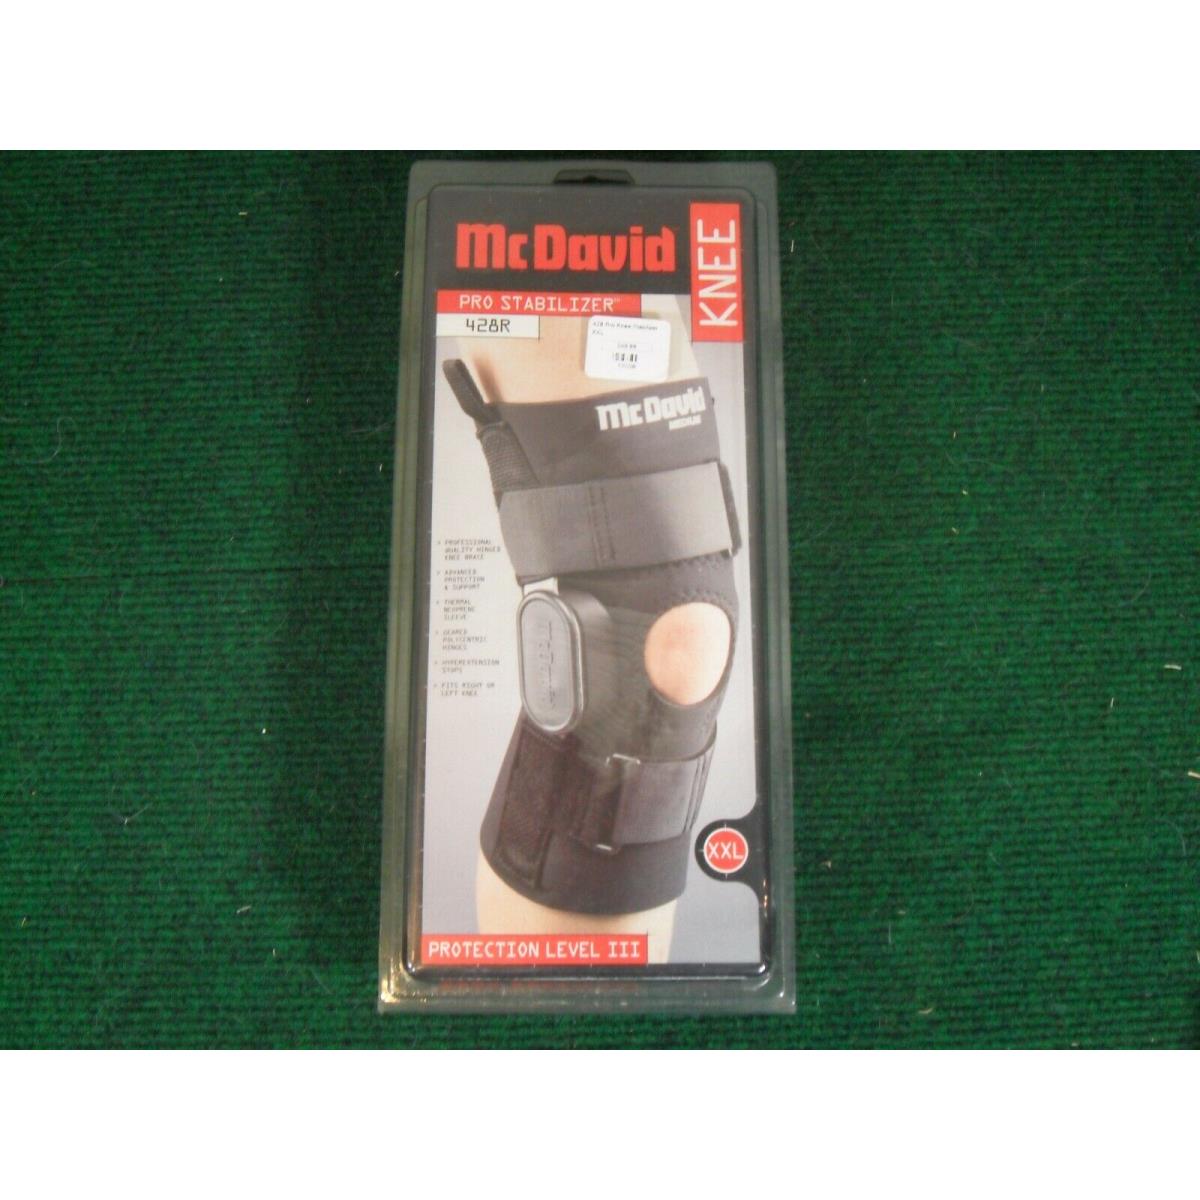 Mcdavid 428R Pro Stabilizer Knee Support Brace Geared Polycentric Hinges Black